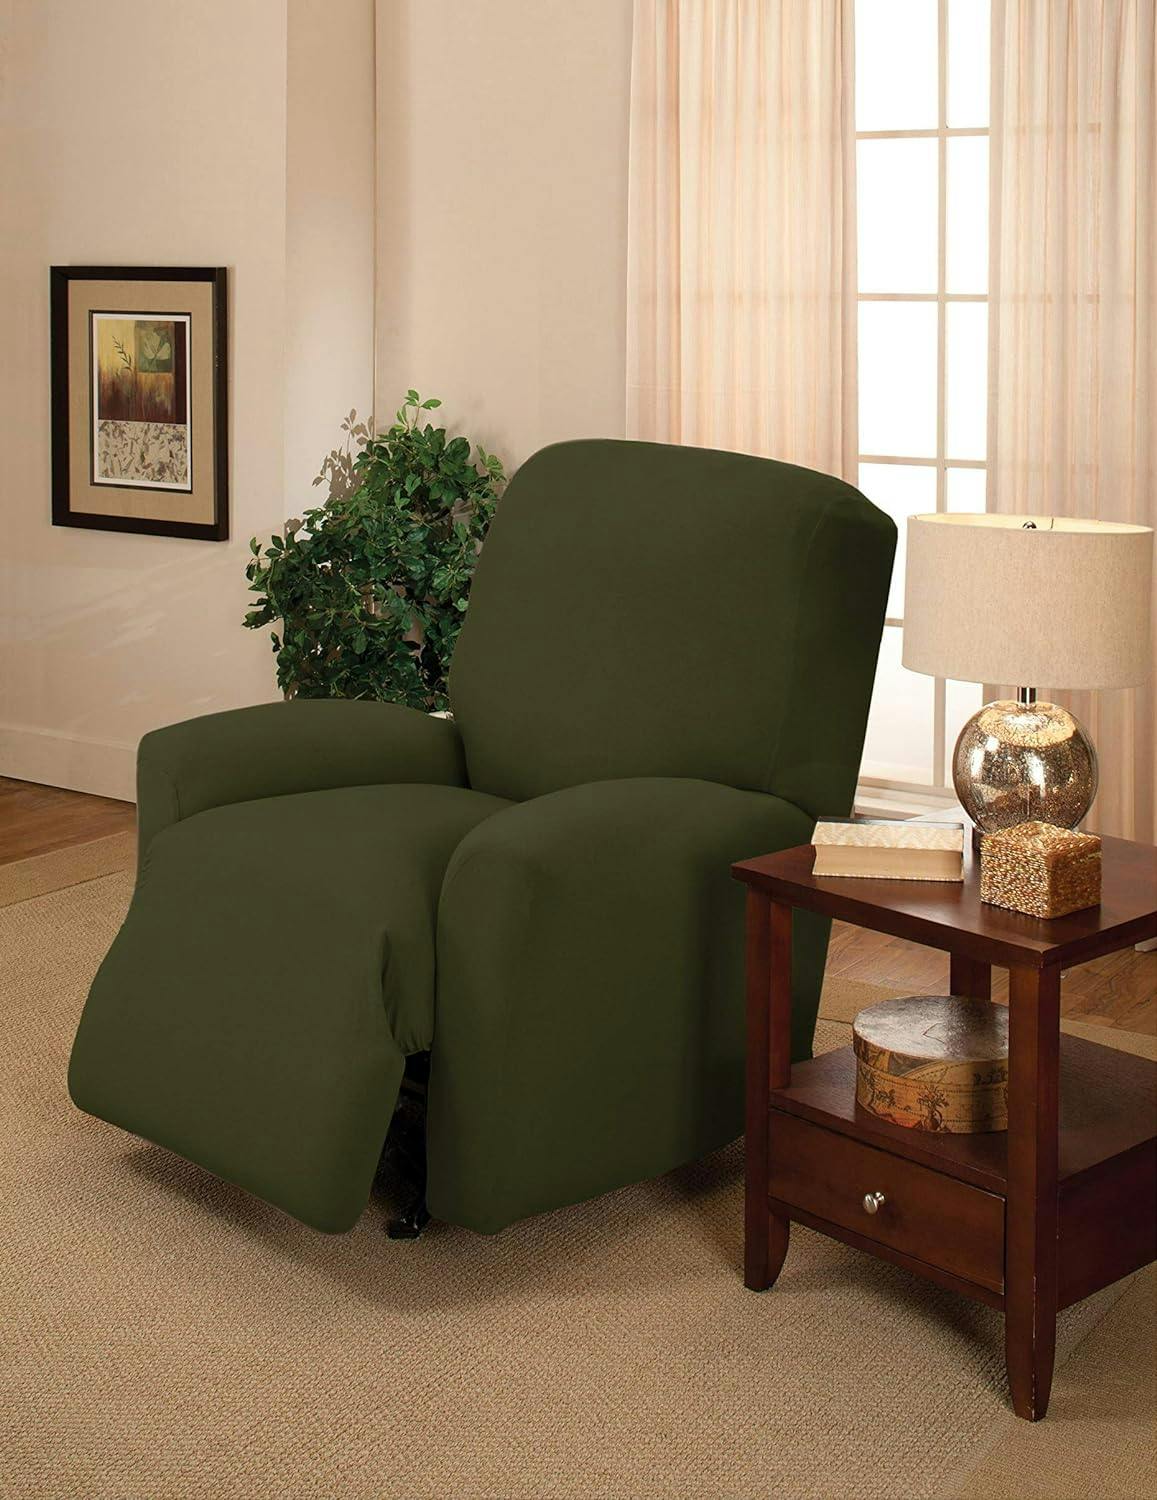 Forest Green Stretch Jersey Large Recliner Slipcover